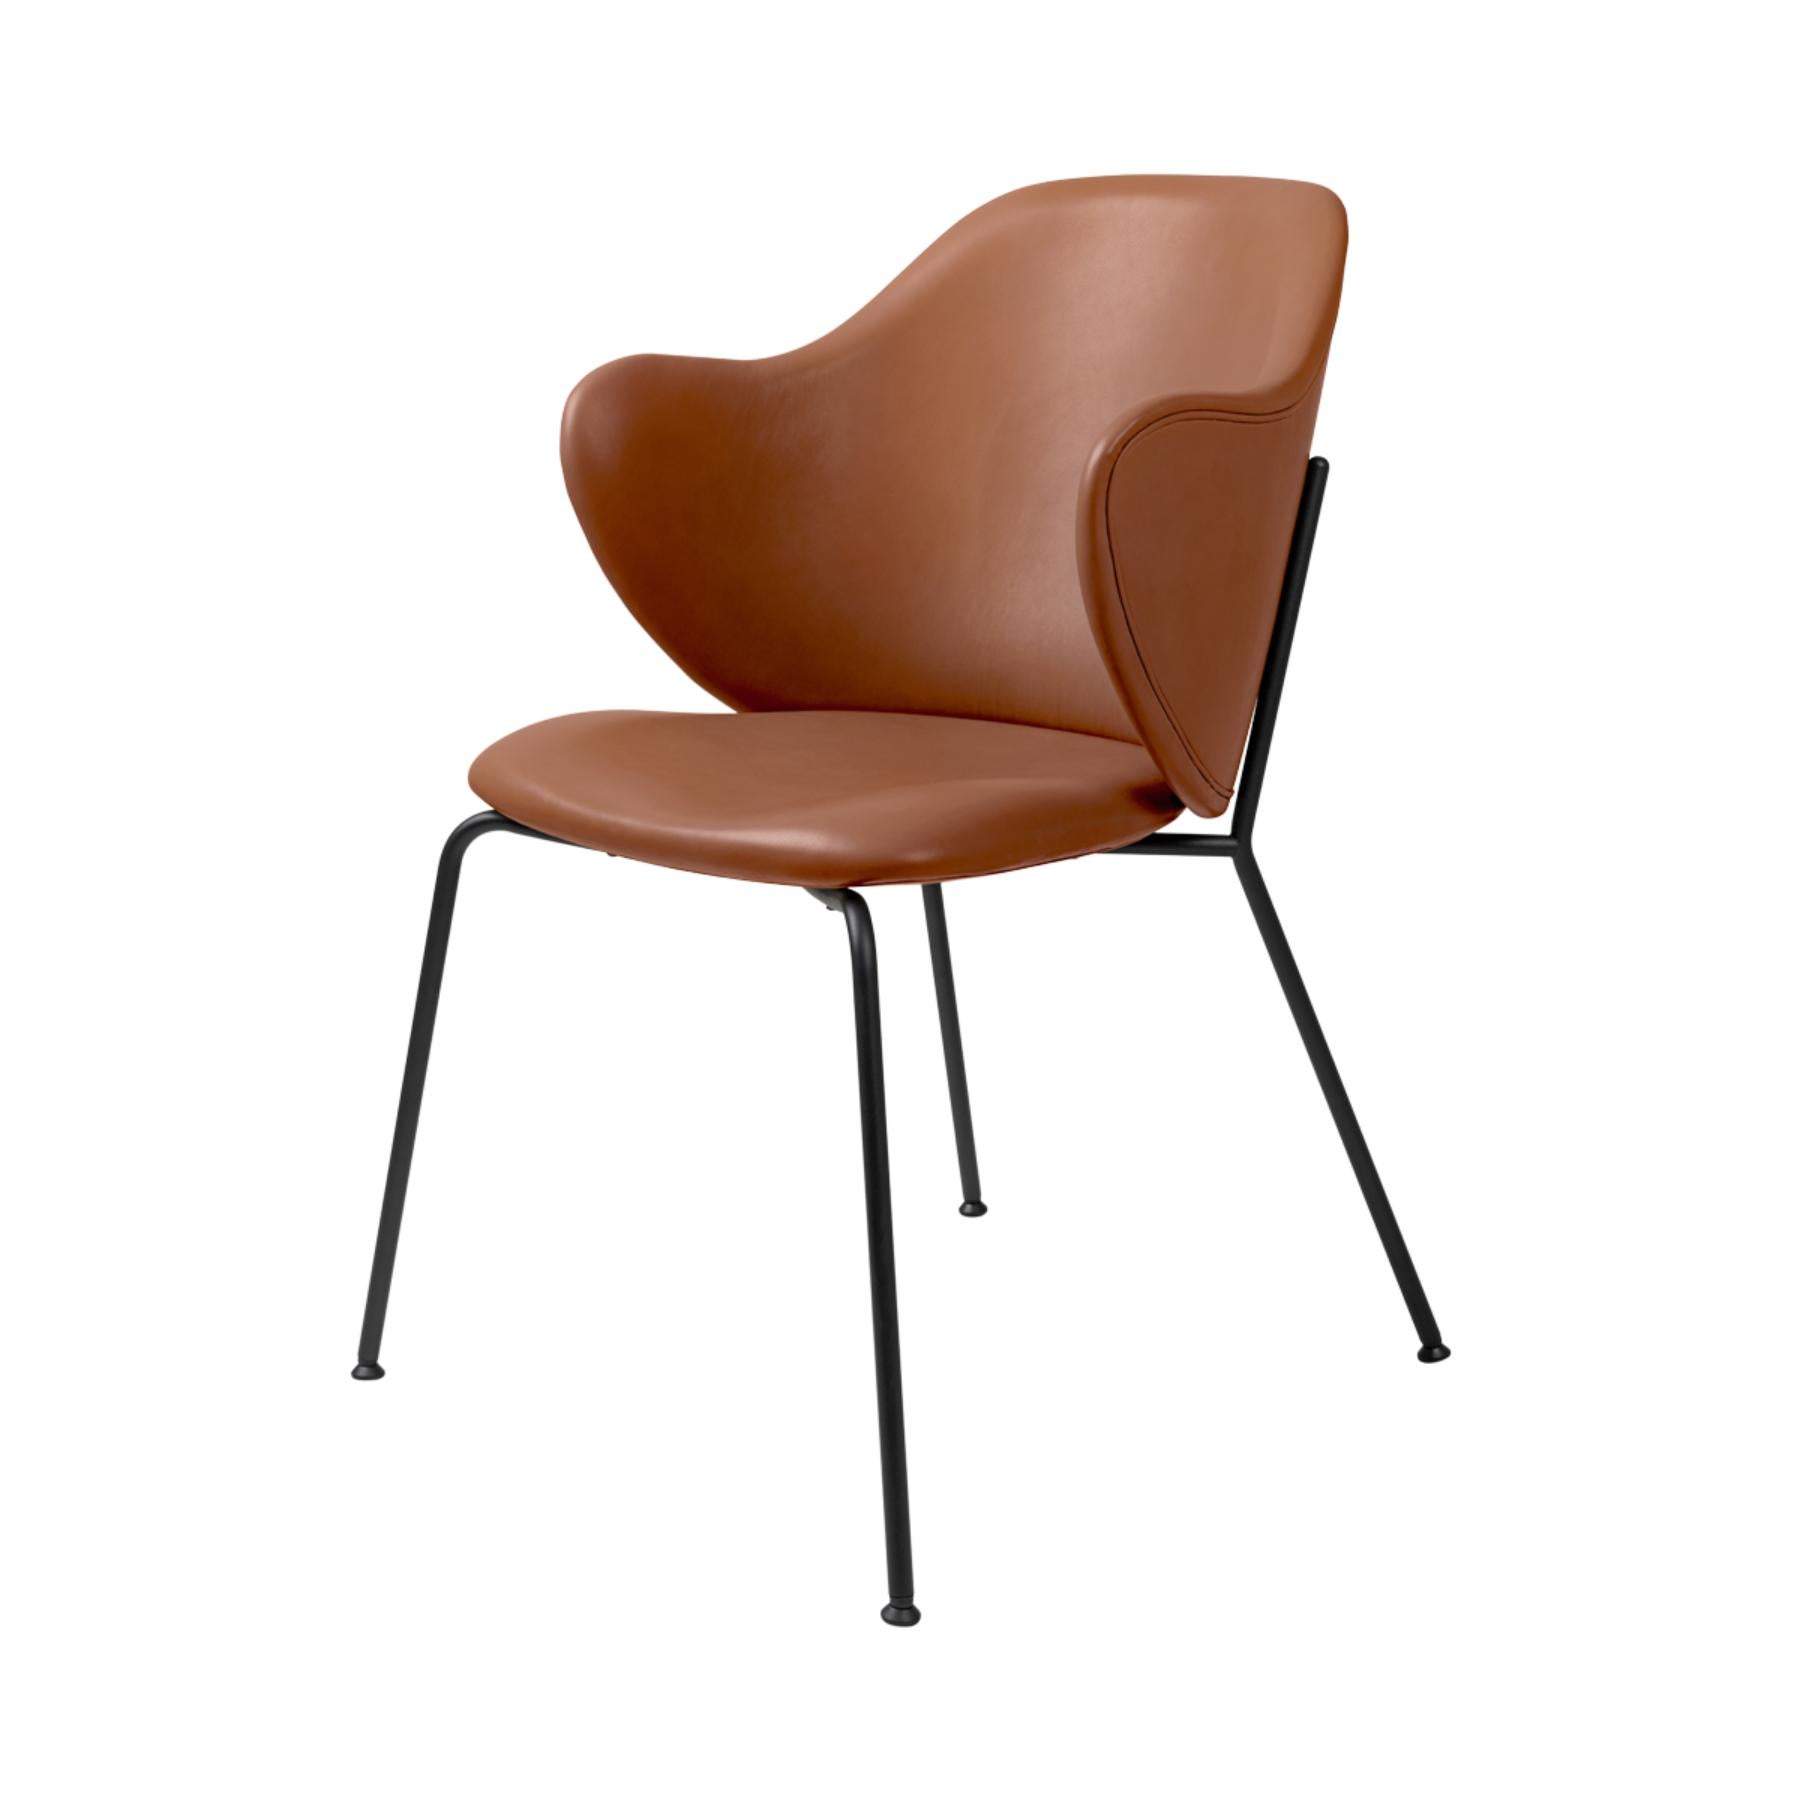 Brownleather lassen chair by Lassen
Dimensions: W 58 x D 60 x H 88 cm 
Materials: Leather

The Lassen chair by Flemming Lassen, Magnus Sangild and Marianne Viktor was launched in 2018 as an ode to Flemming Lassen’s uncompromising approach and